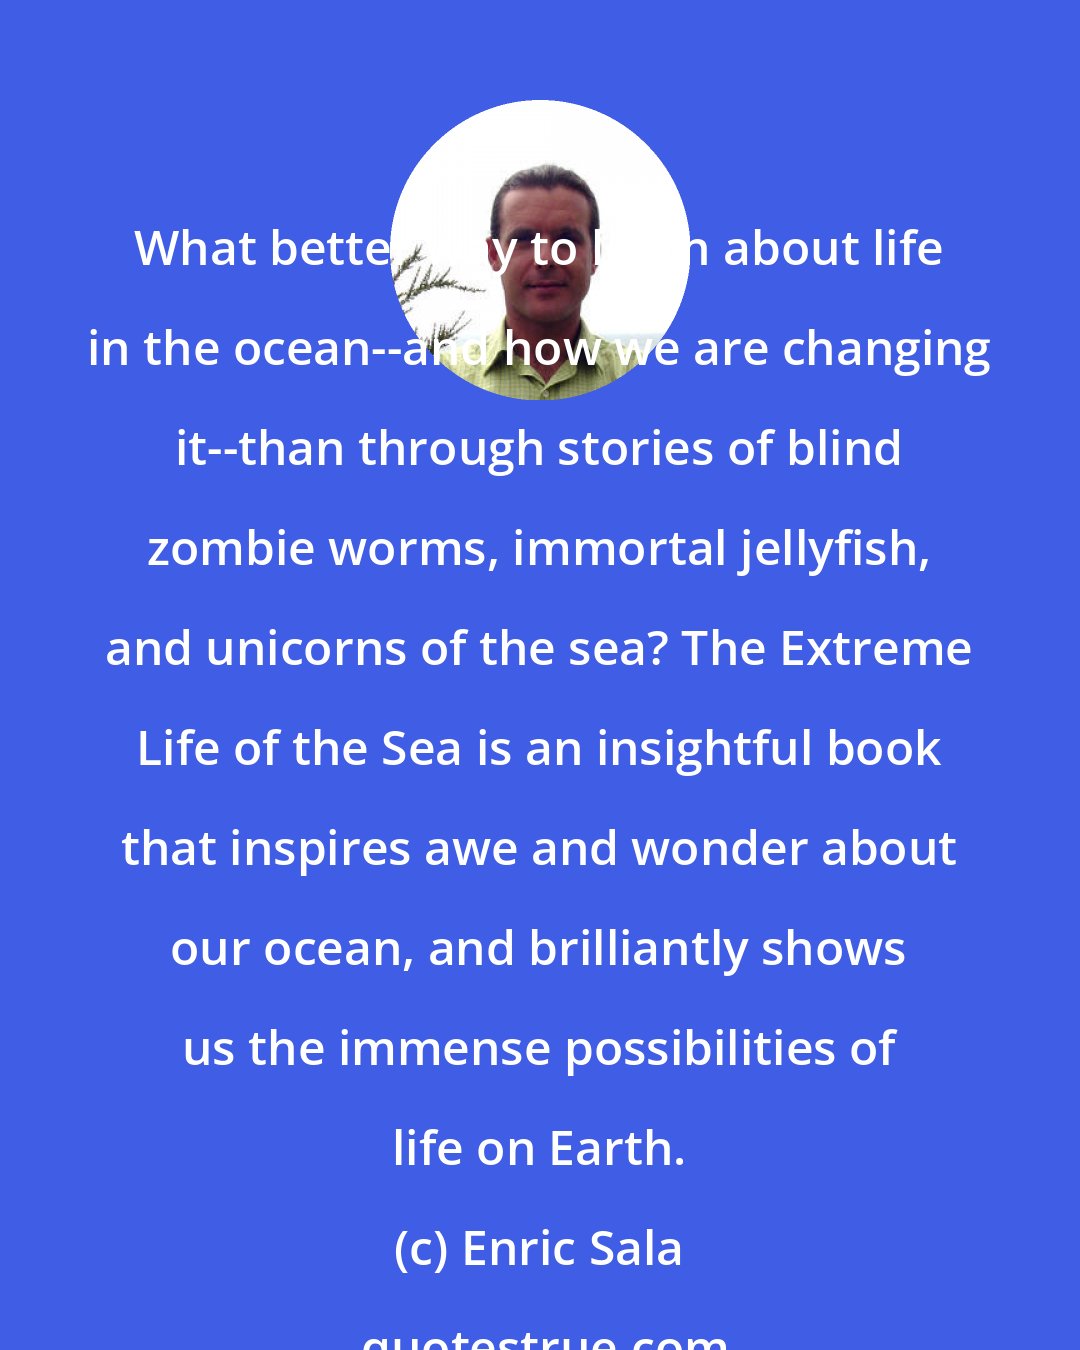 Enric Sala: What better way to learn about life in the ocean--and how we are changing it--than through stories of blind zombie worms, immortal jellyfish, and unicorns of the sea? The Extreme Life of the Sea is an insightful book that inspires awe and wonder about our ocean, and brilliantly shows us the immense possibilities of life on Earth.